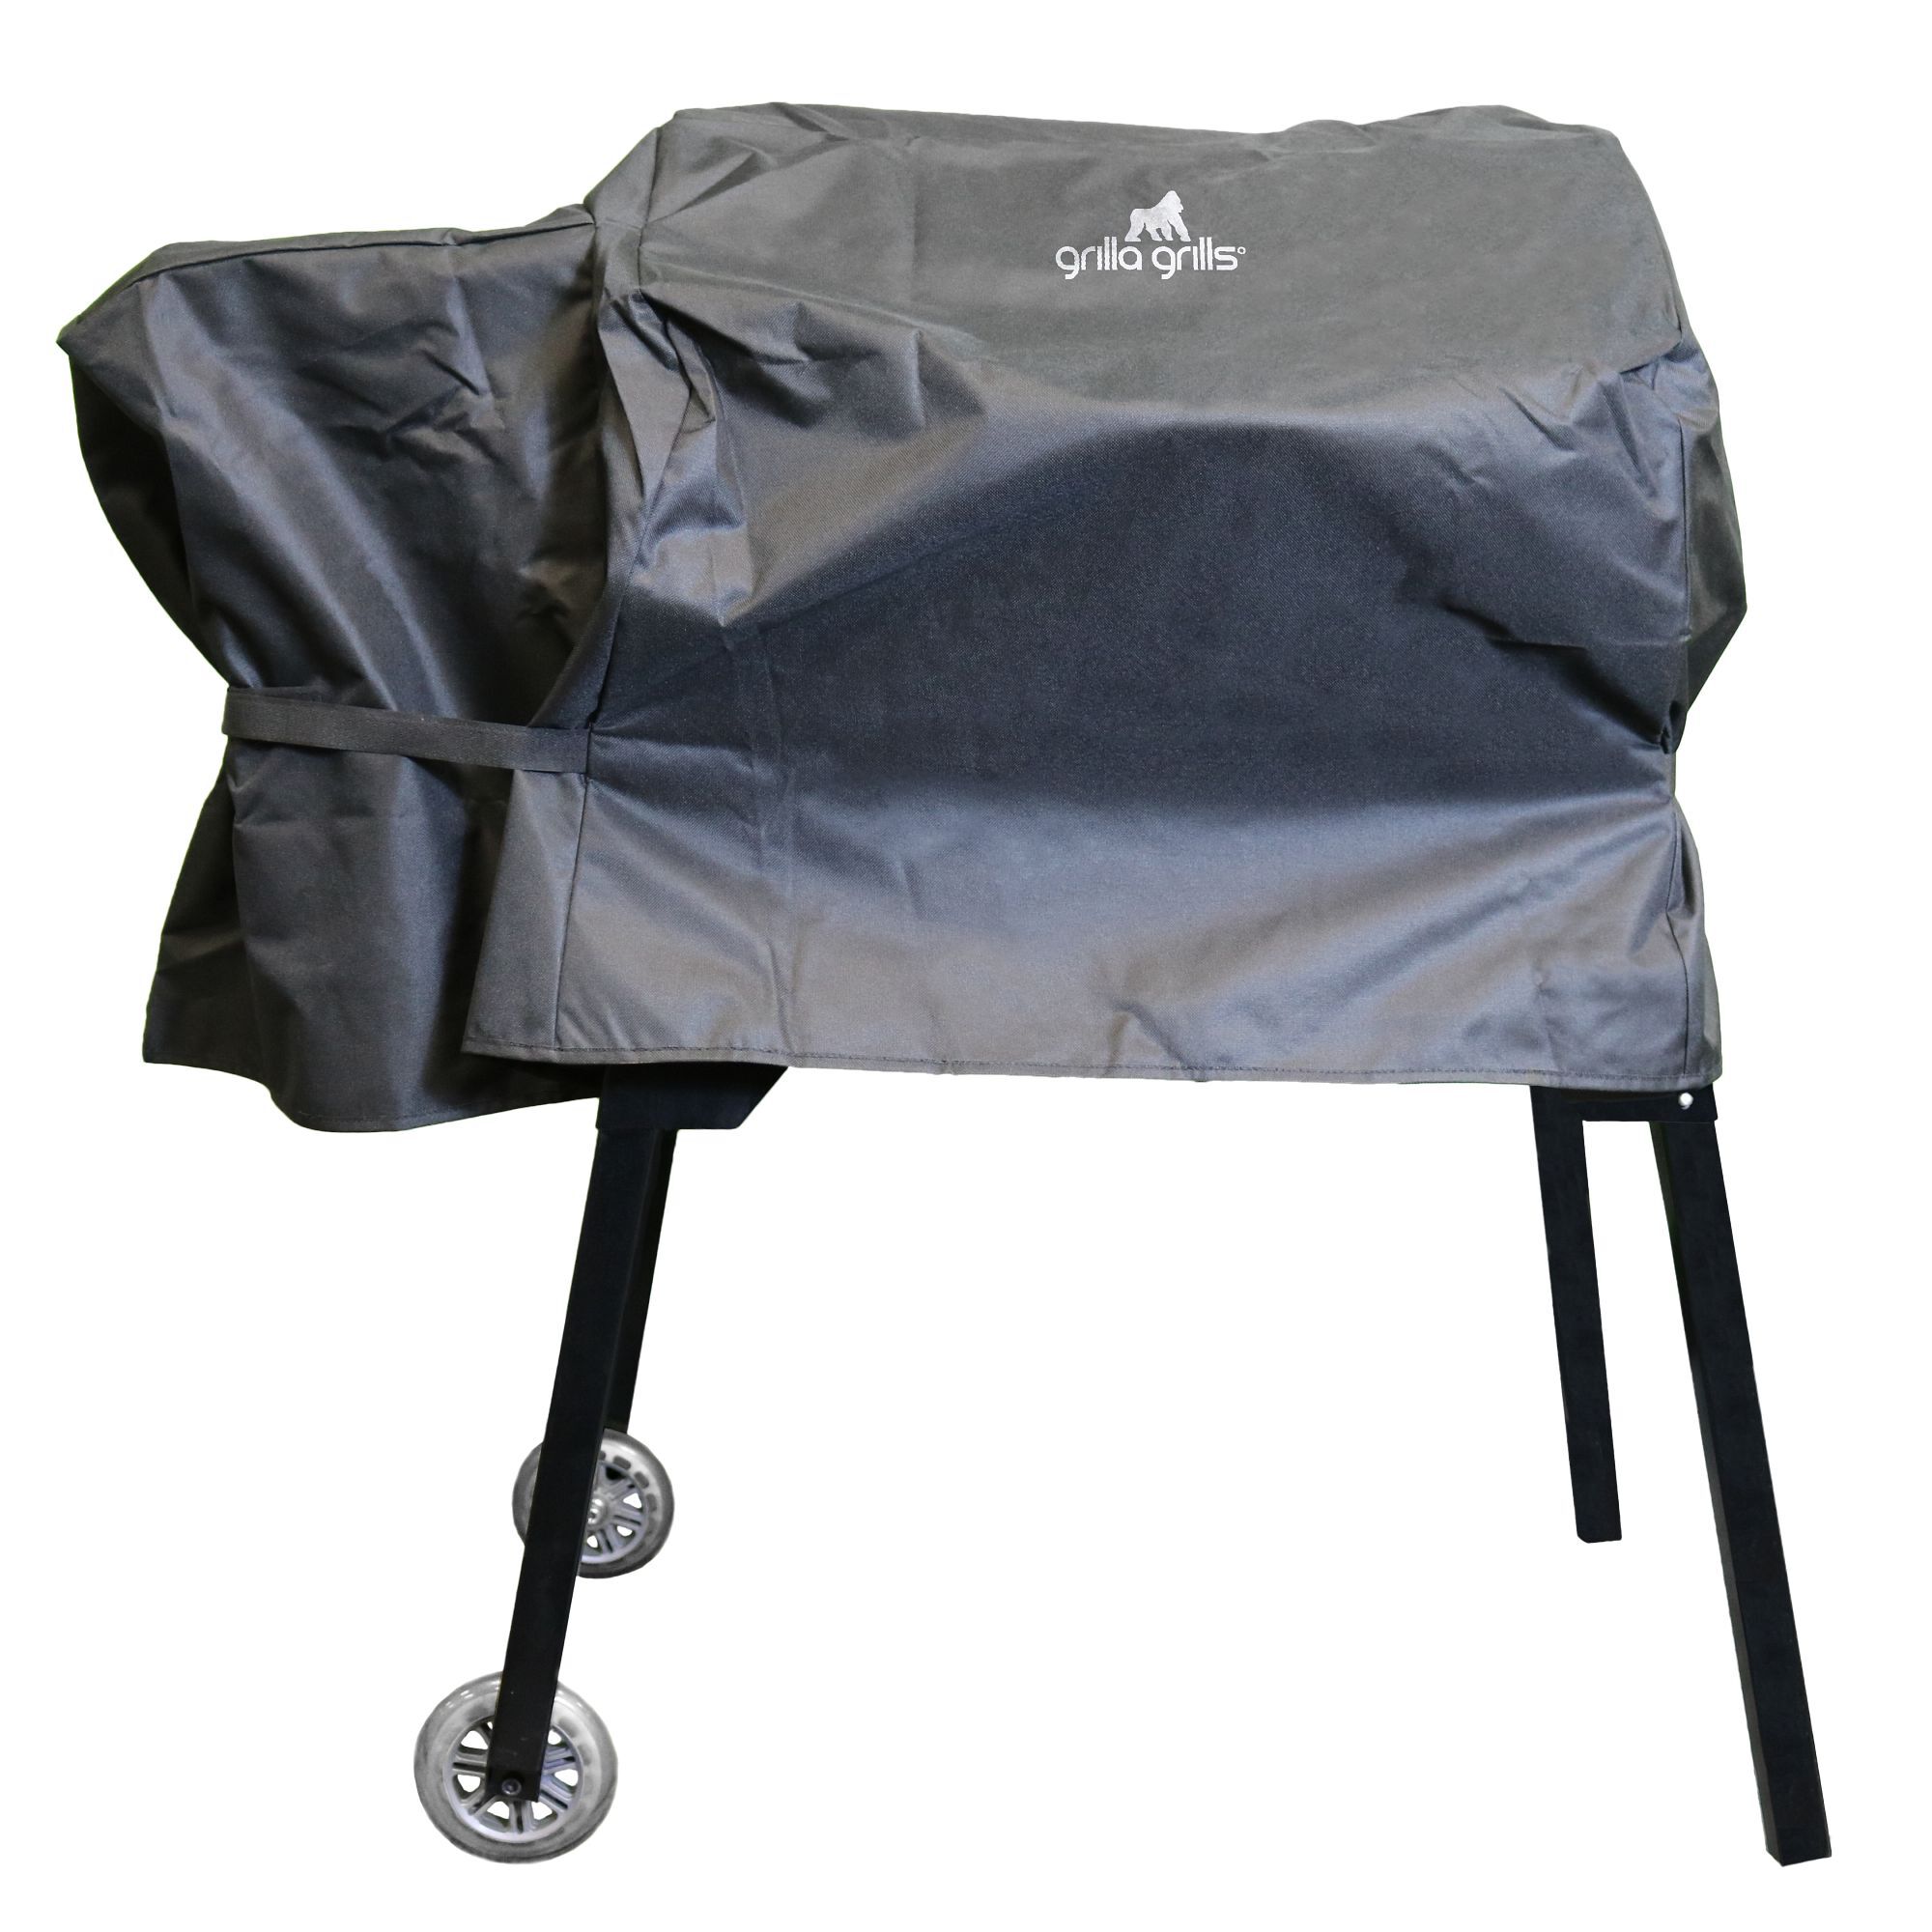 Grill Cover for Chimp Wood Pellet Grill